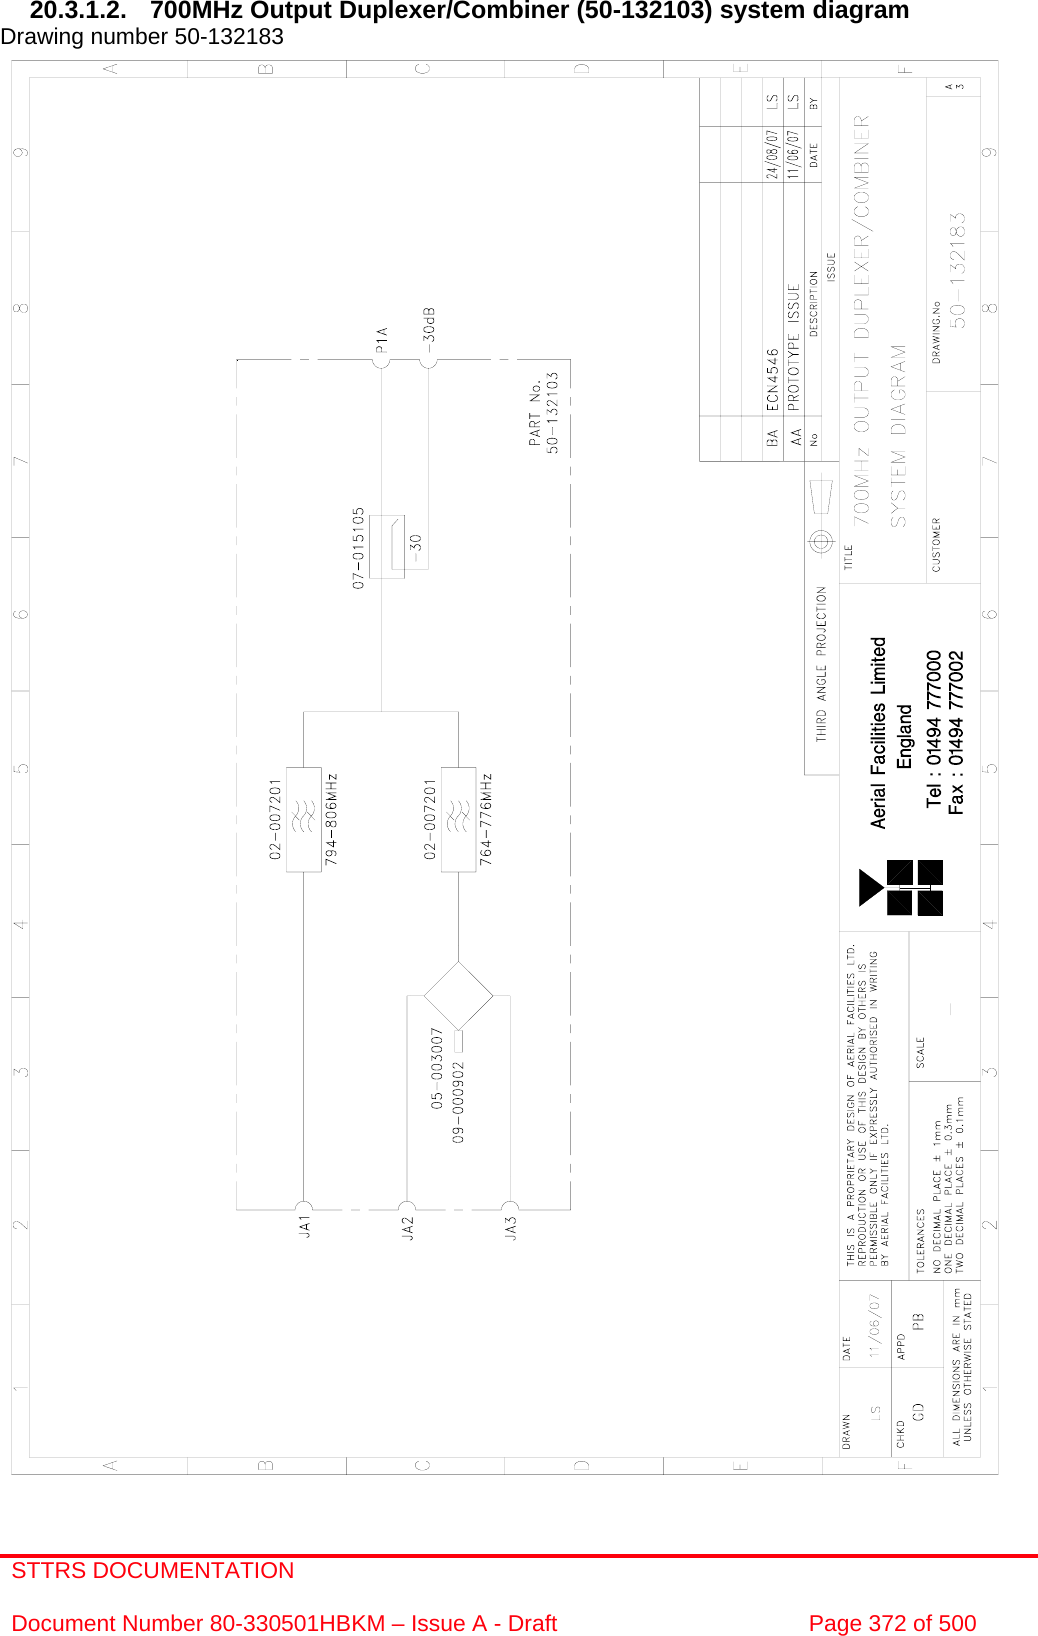 STTRS DOCUMENTATION  Document Number 80-330501HBKM – Issue A - Draft  Page 372 of 500   20.3.1.2.  700MHz Output Duplexer/Combiner (50-132103) system diagram  Drawing number 50-132183                                                      